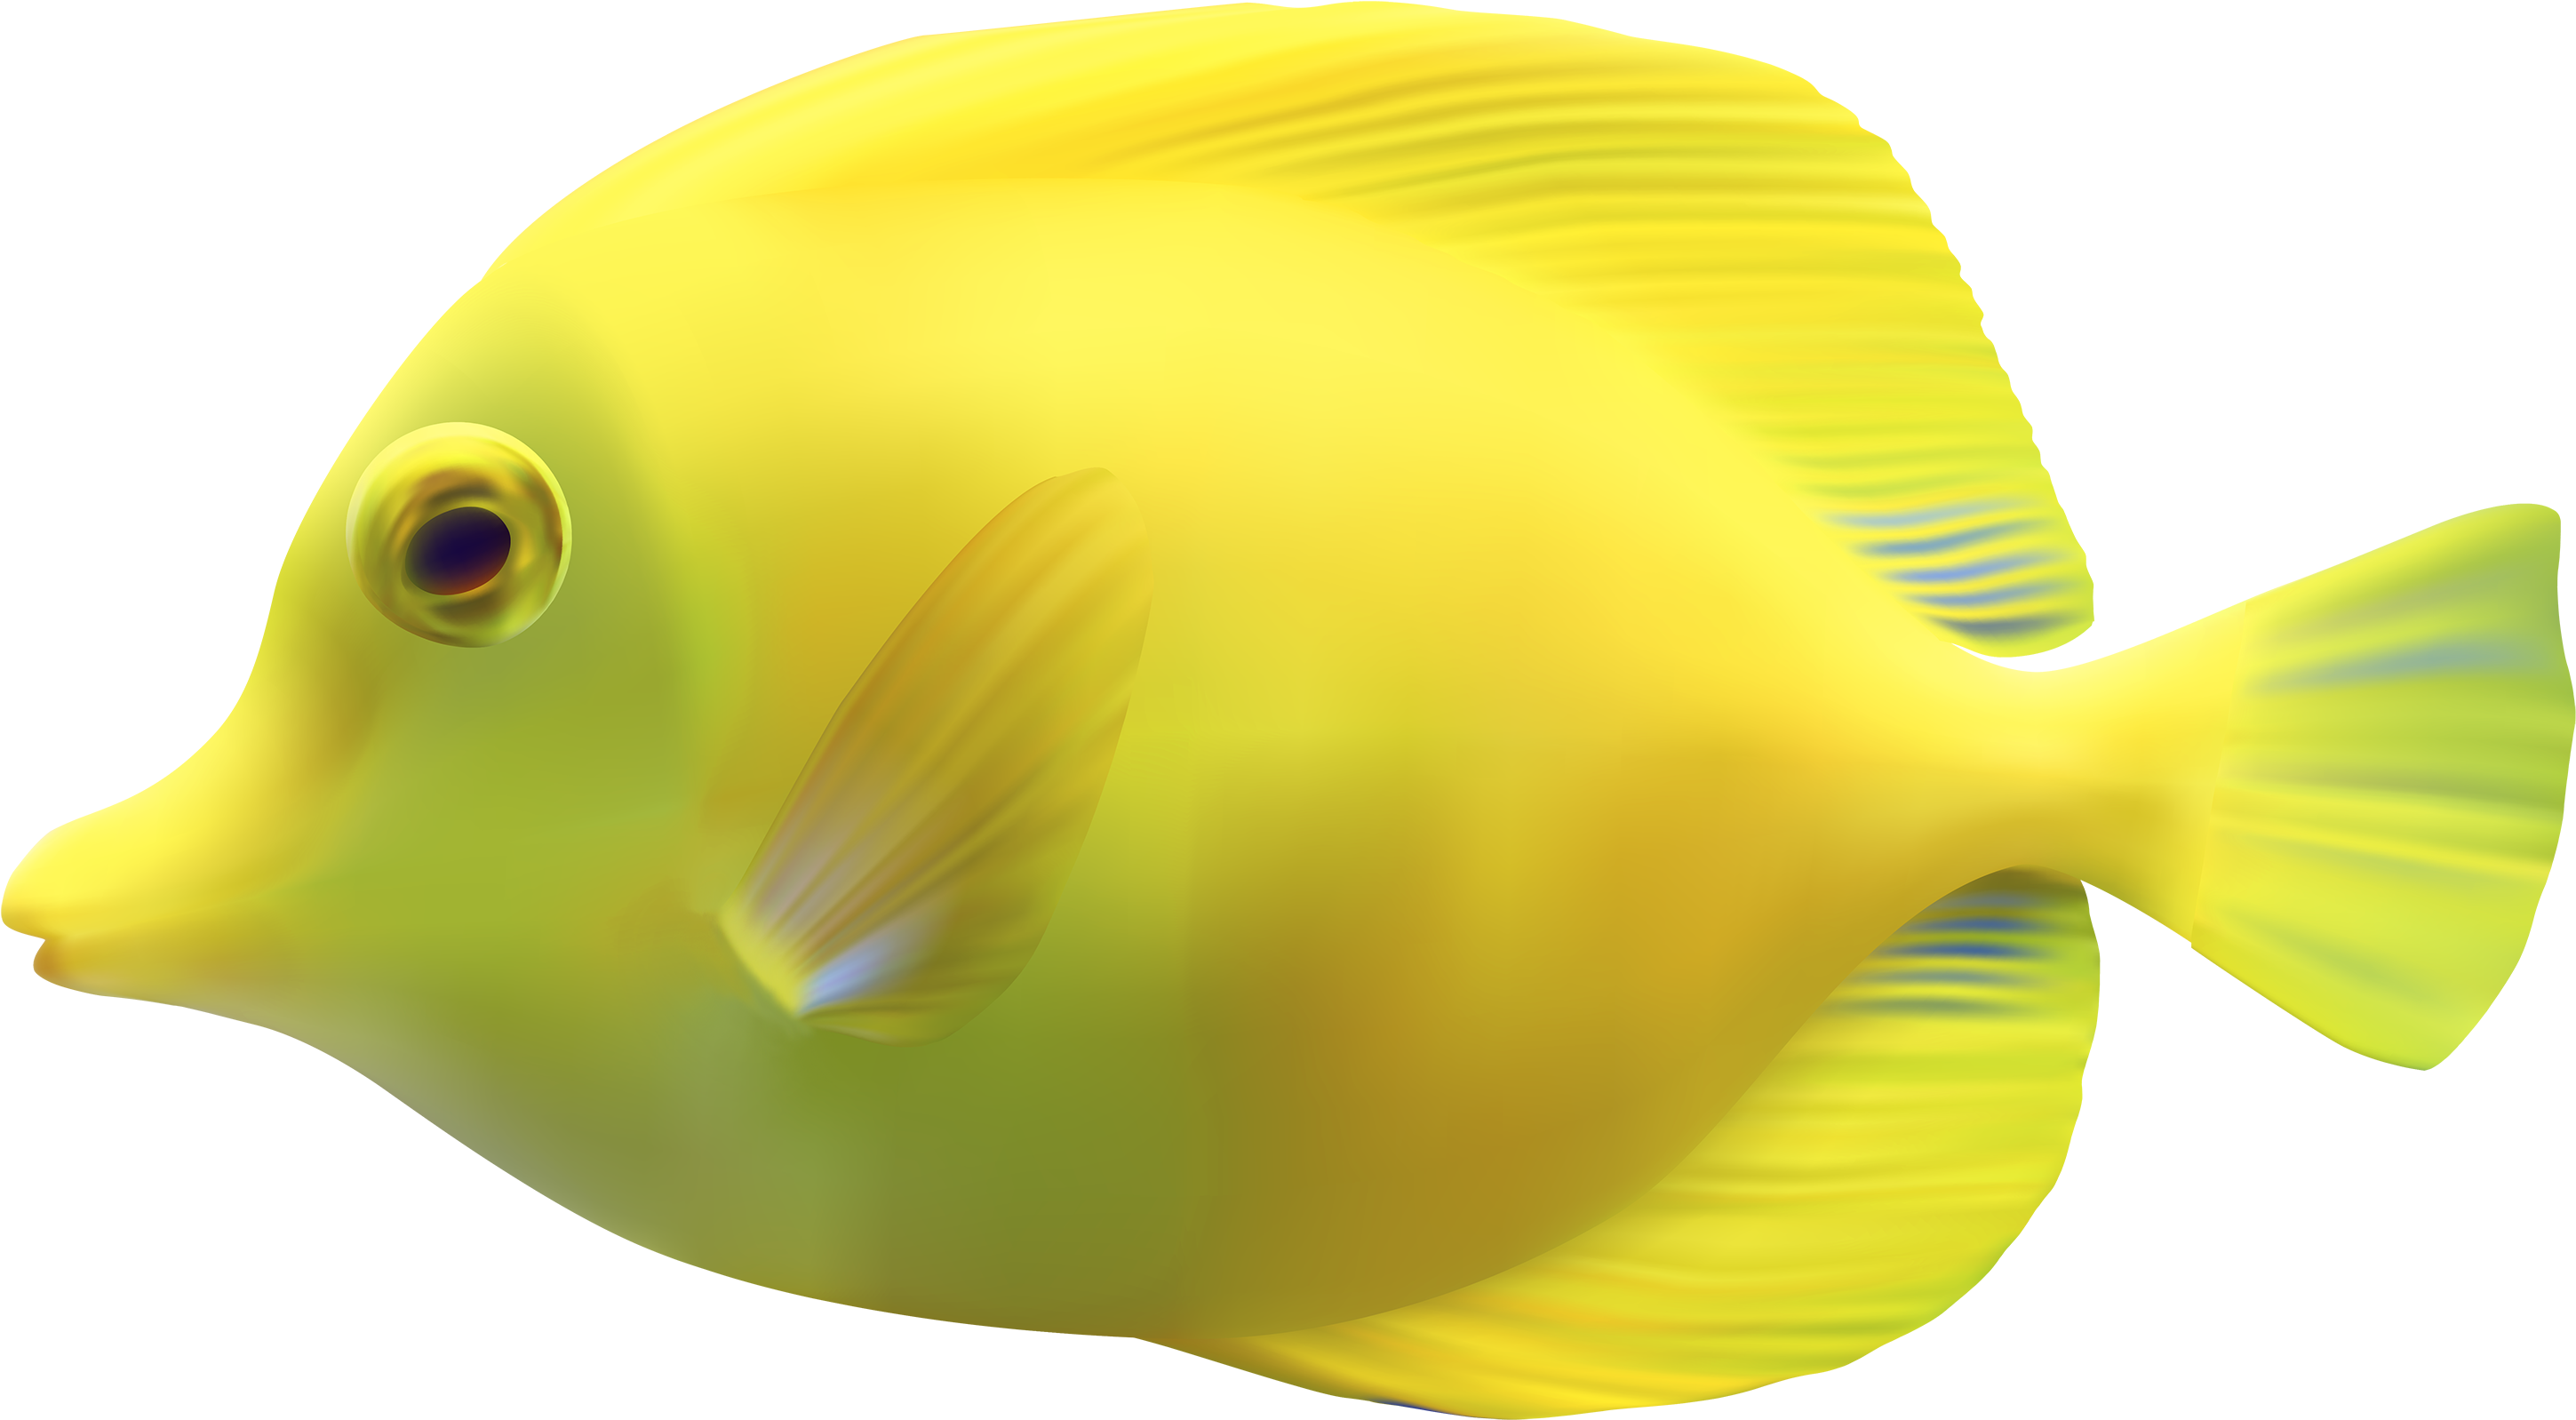 A Yellow Fish With Black Background